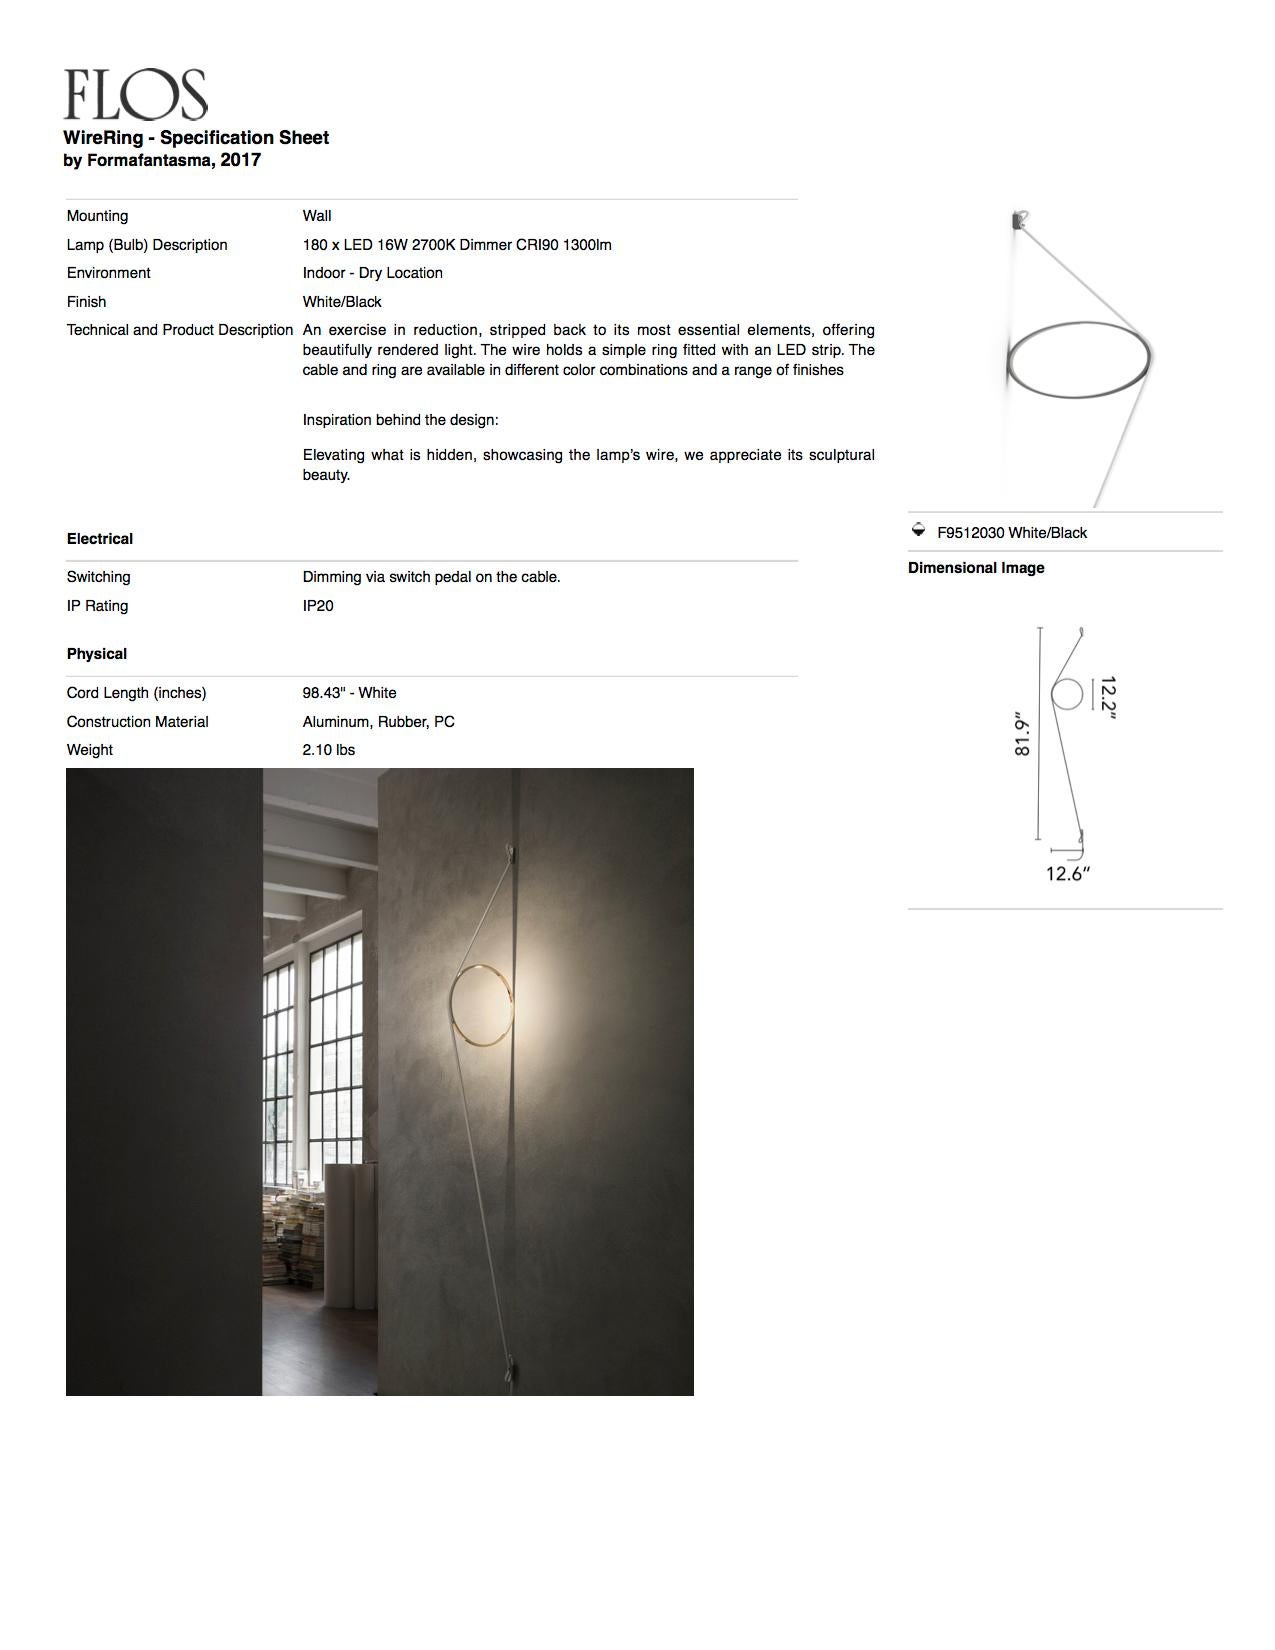 Contemporary FLOS Wirering Wall Light in White and Black by Formafantasma